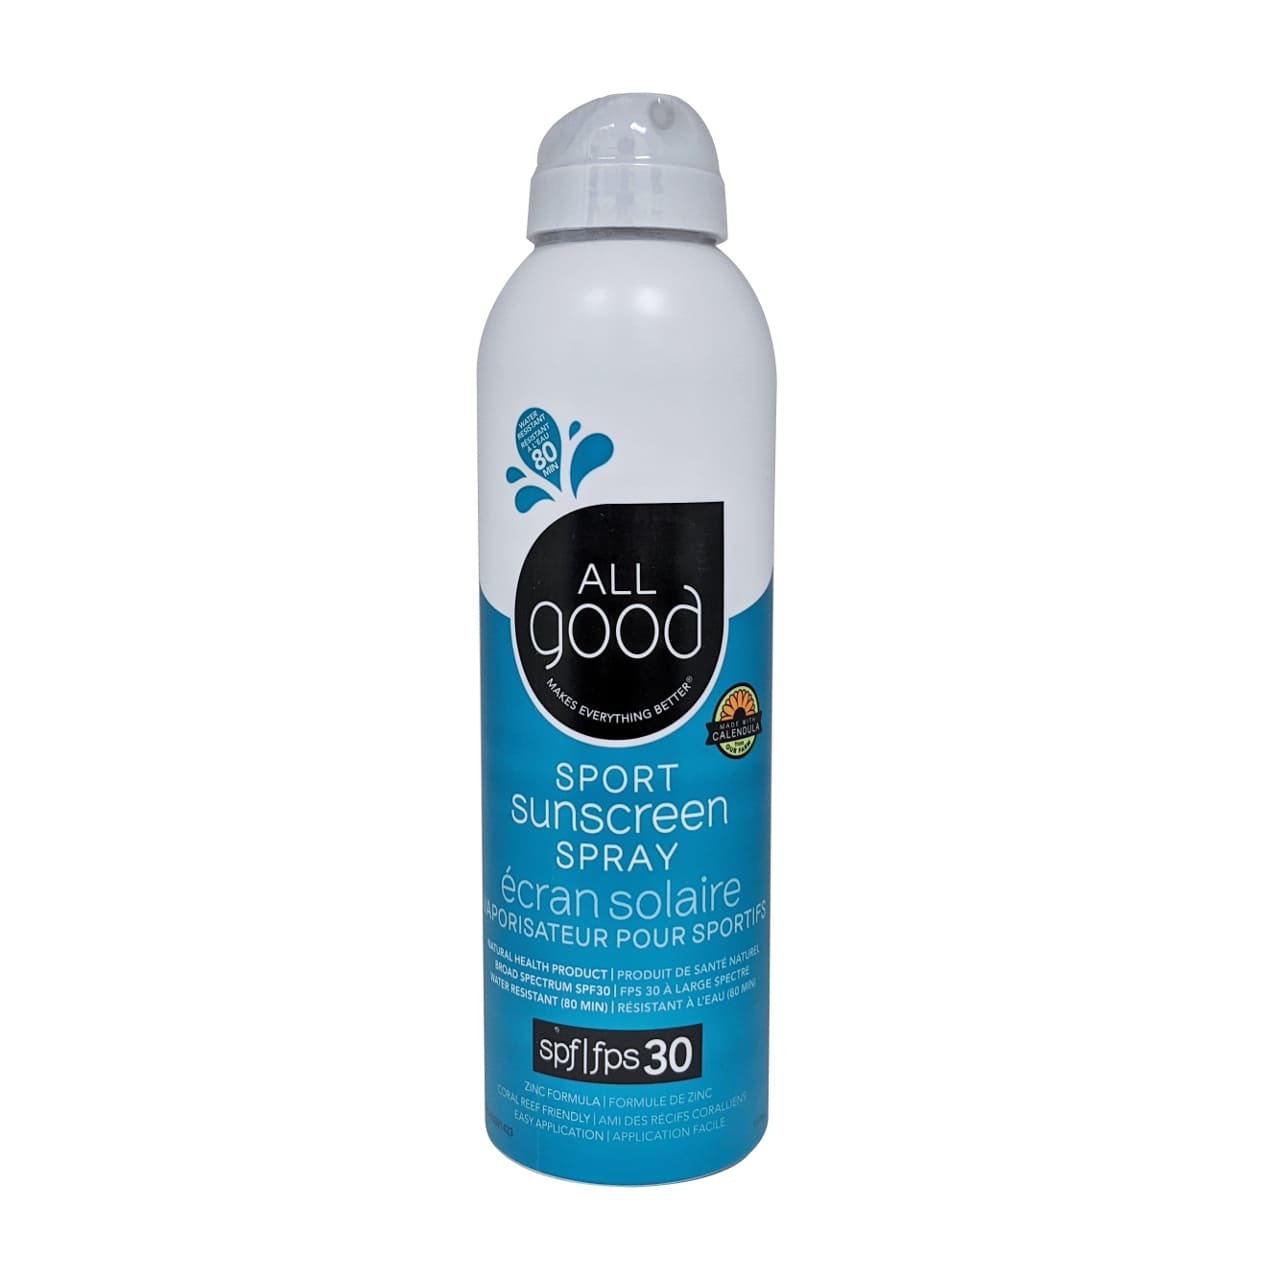 Product package for All Good Sport Sunscreen Spray SPF30